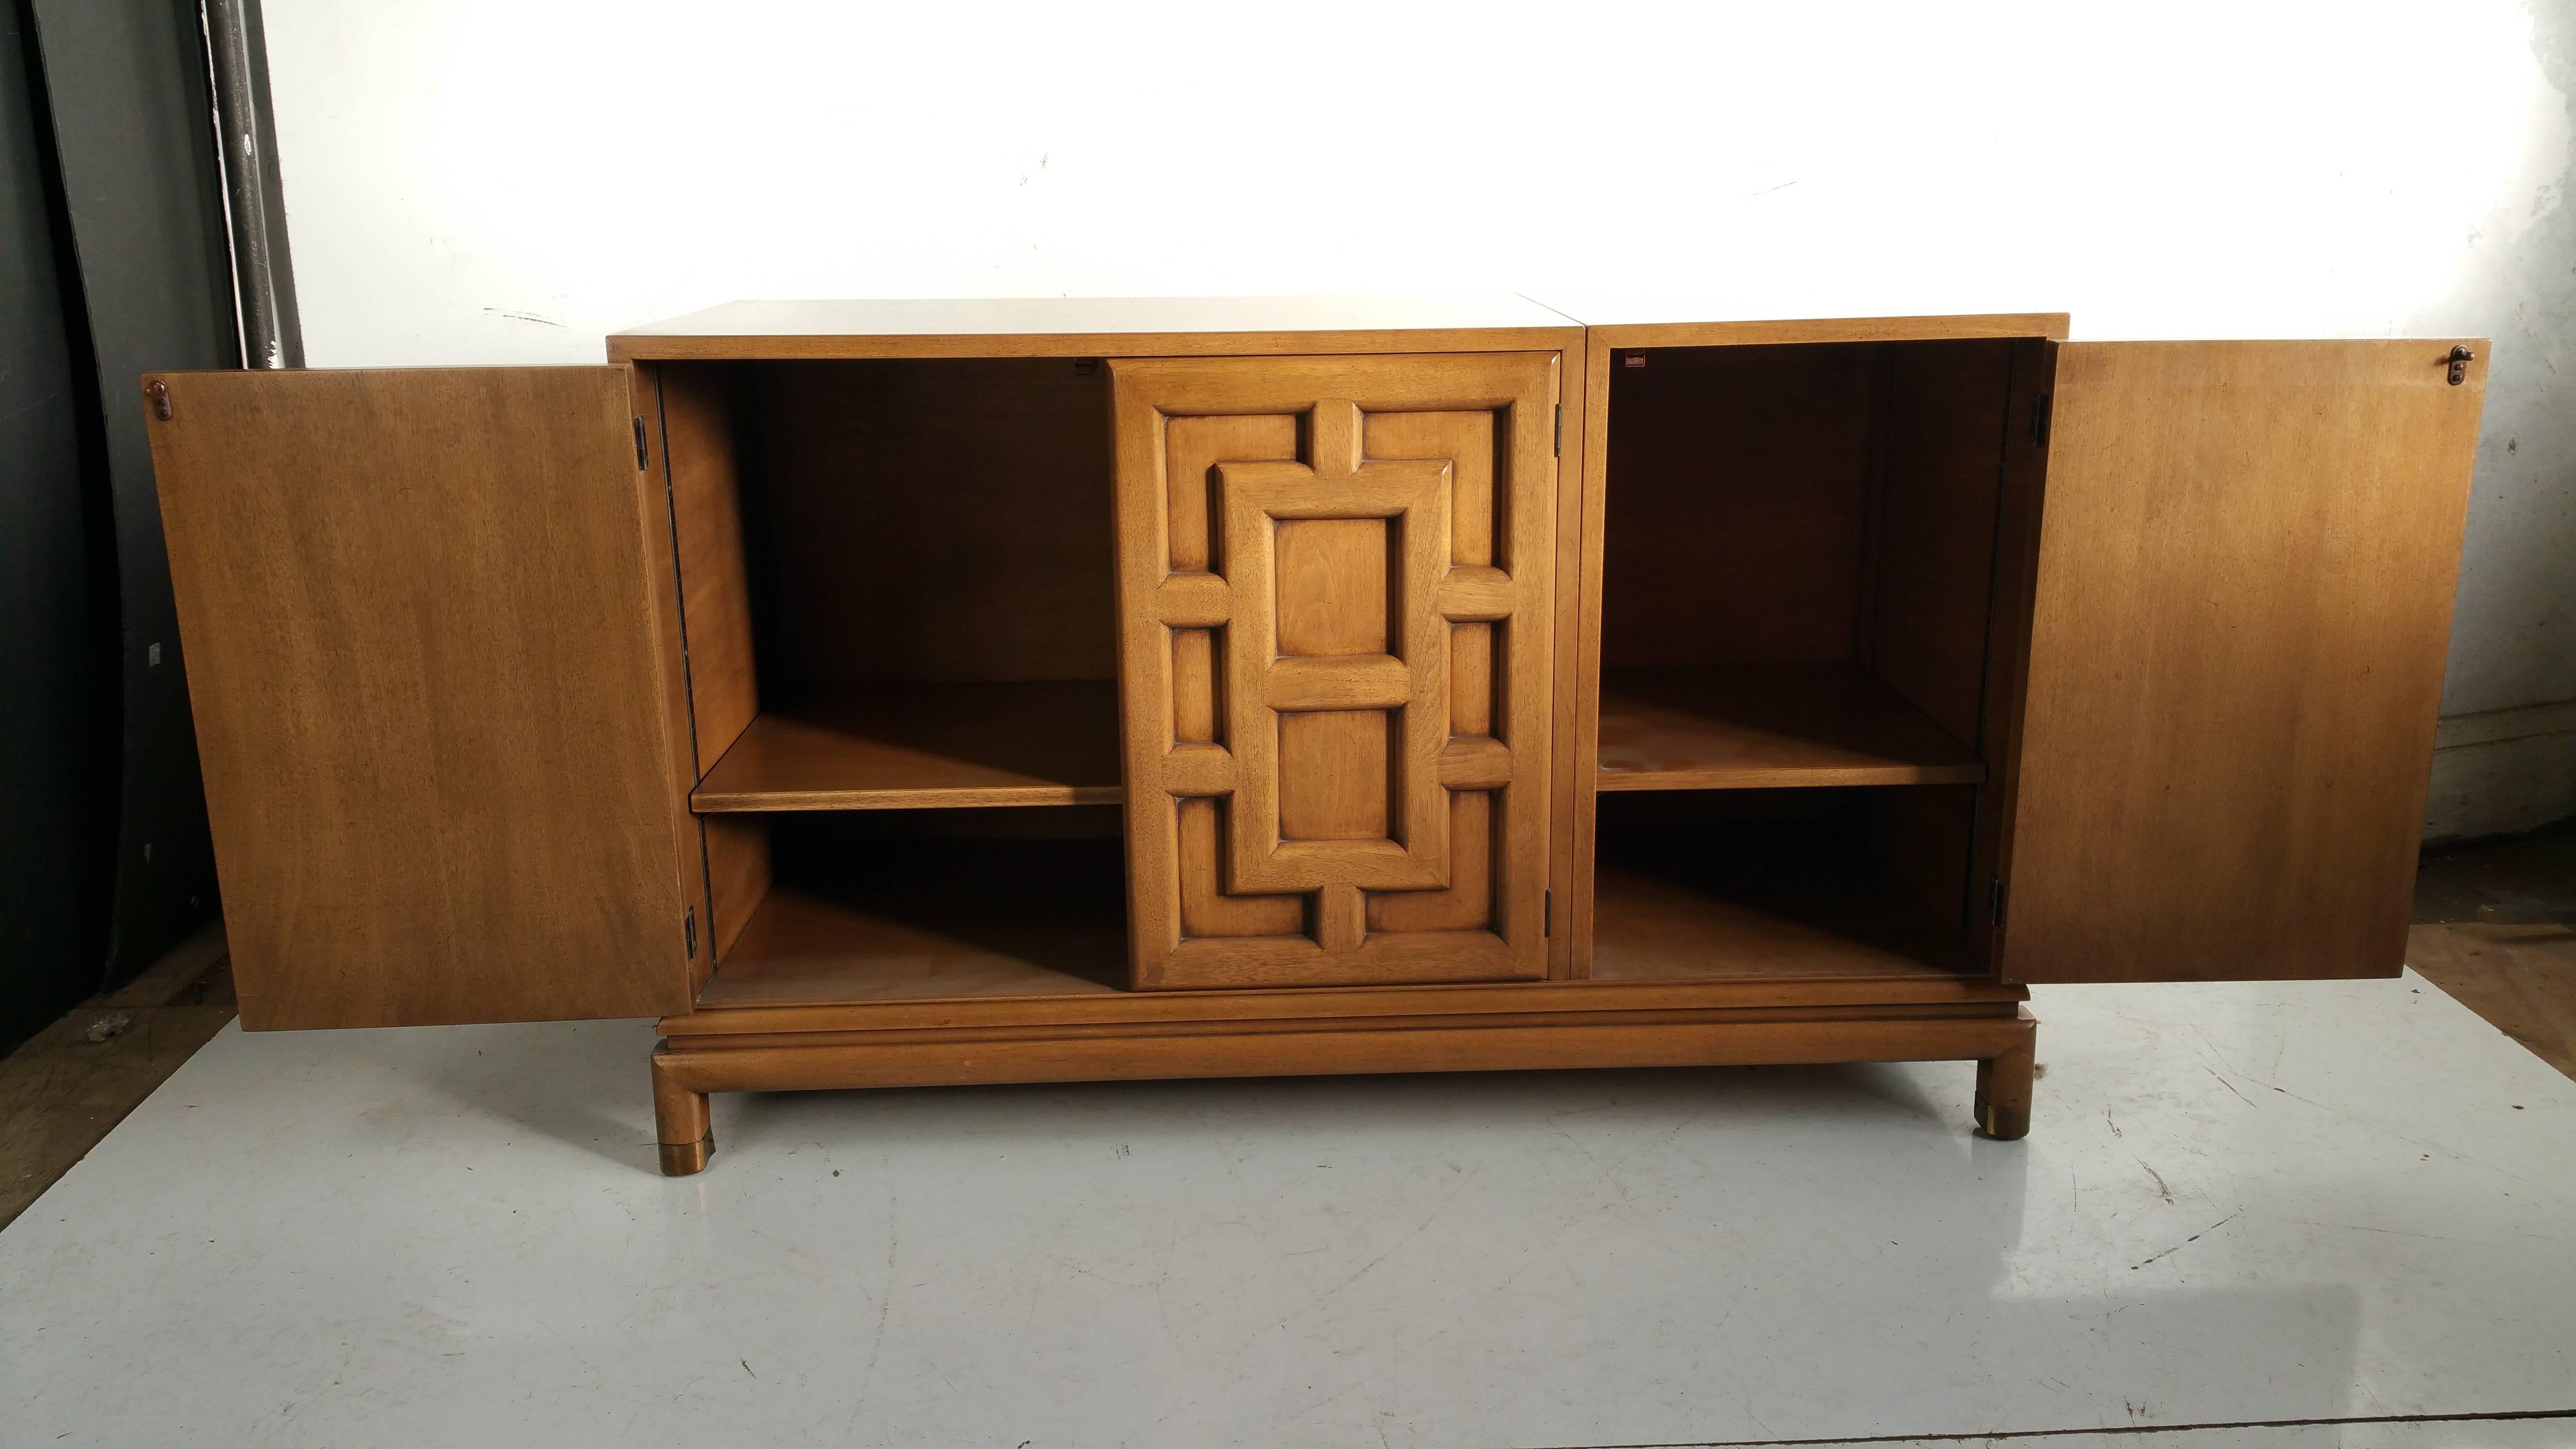 An Asian Modern four-door cabinet designed by Renzo Rutili with fretwork style paneling, 1960s, brass detailed foot. Finished back.